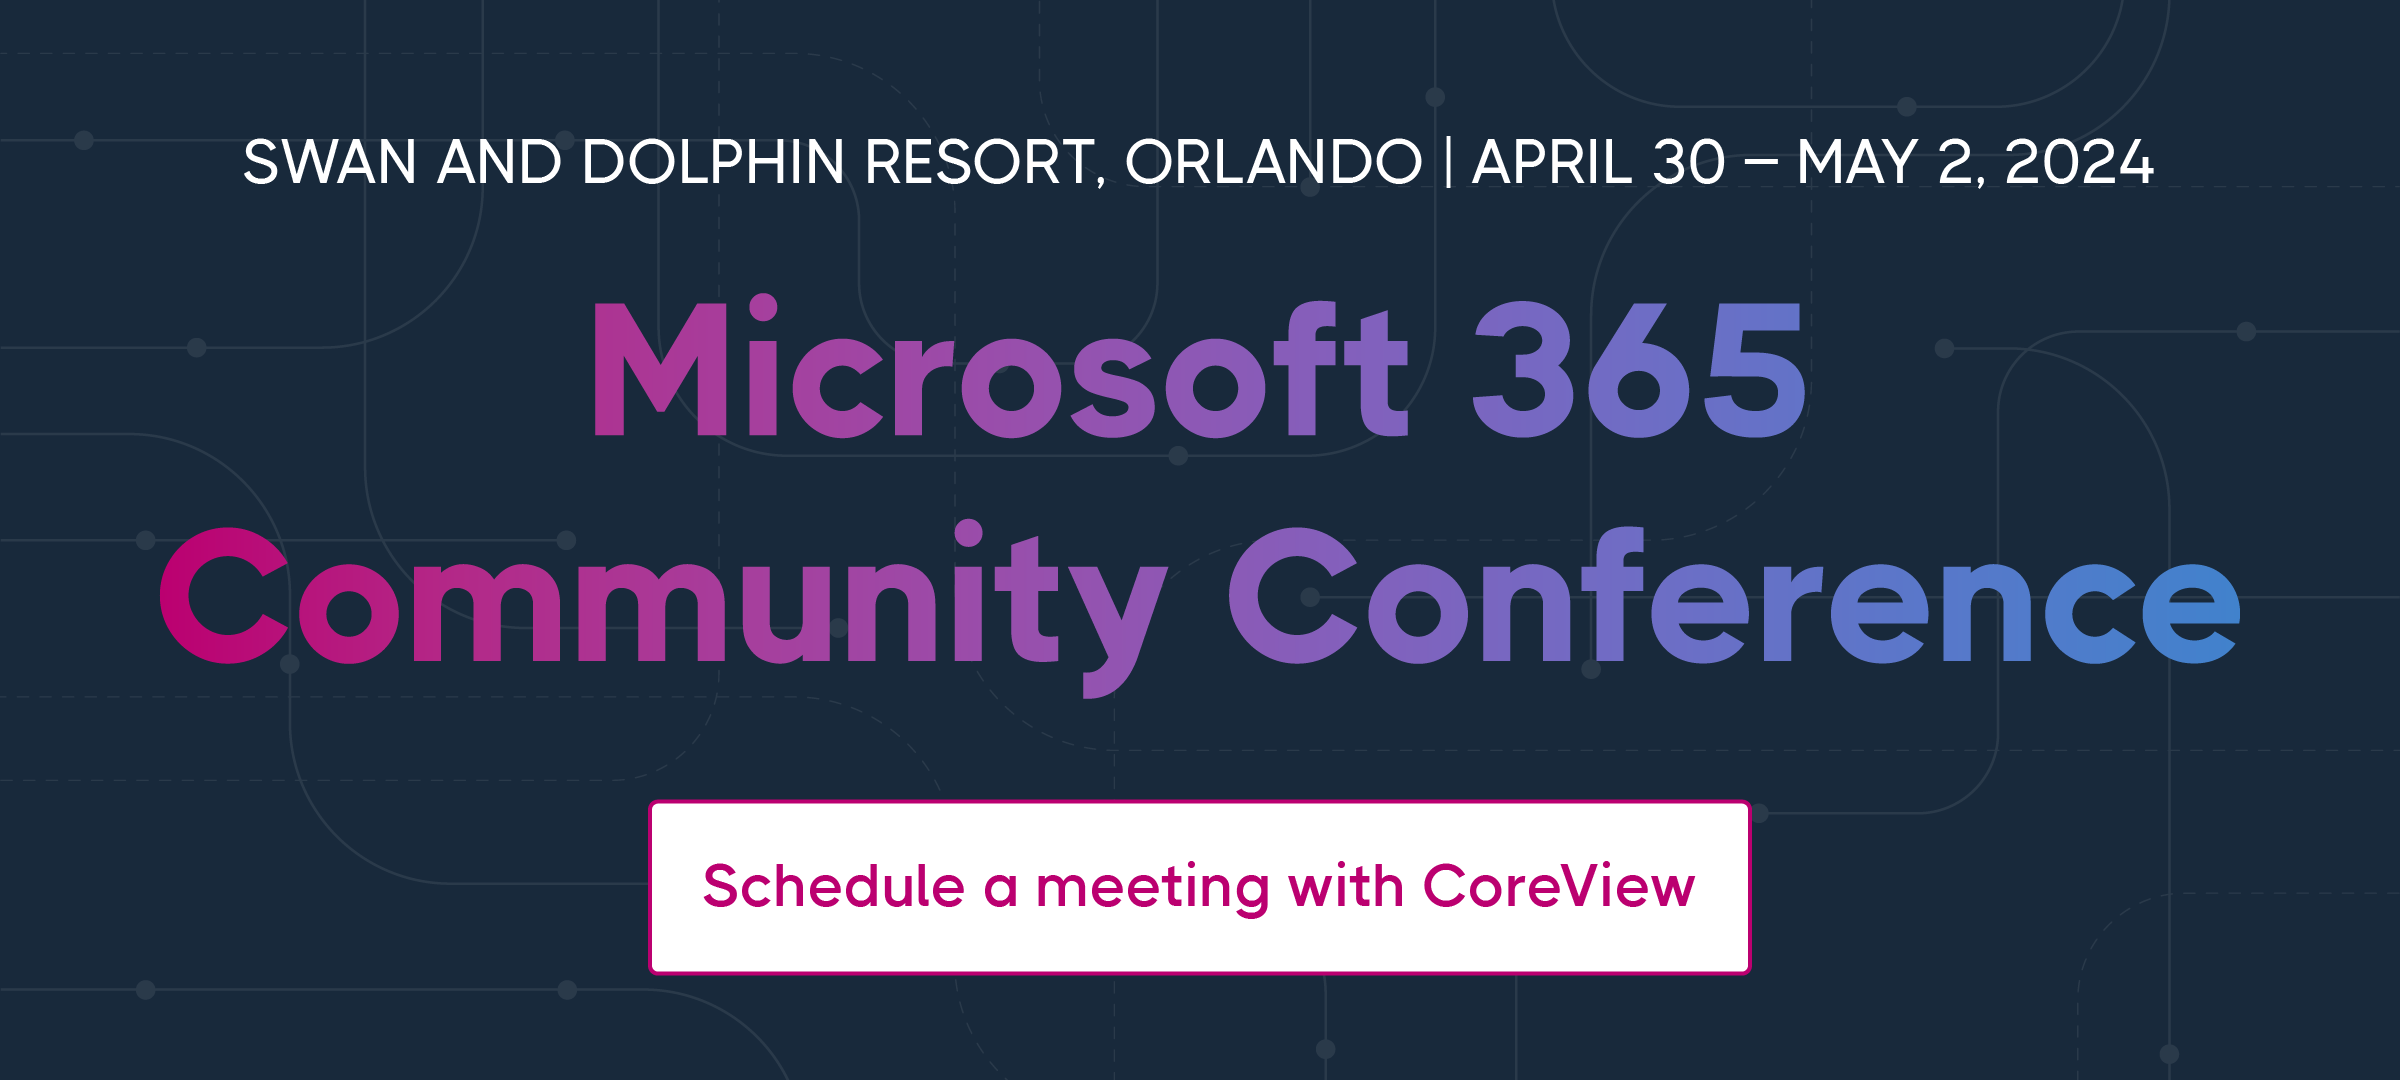 SWAN  AND DOLPHIN RESORTS, ORLANDO | APRIL 30 - MAY 2,2024 Microsoft 365 Community Conference Schedule a meeting with CoreView